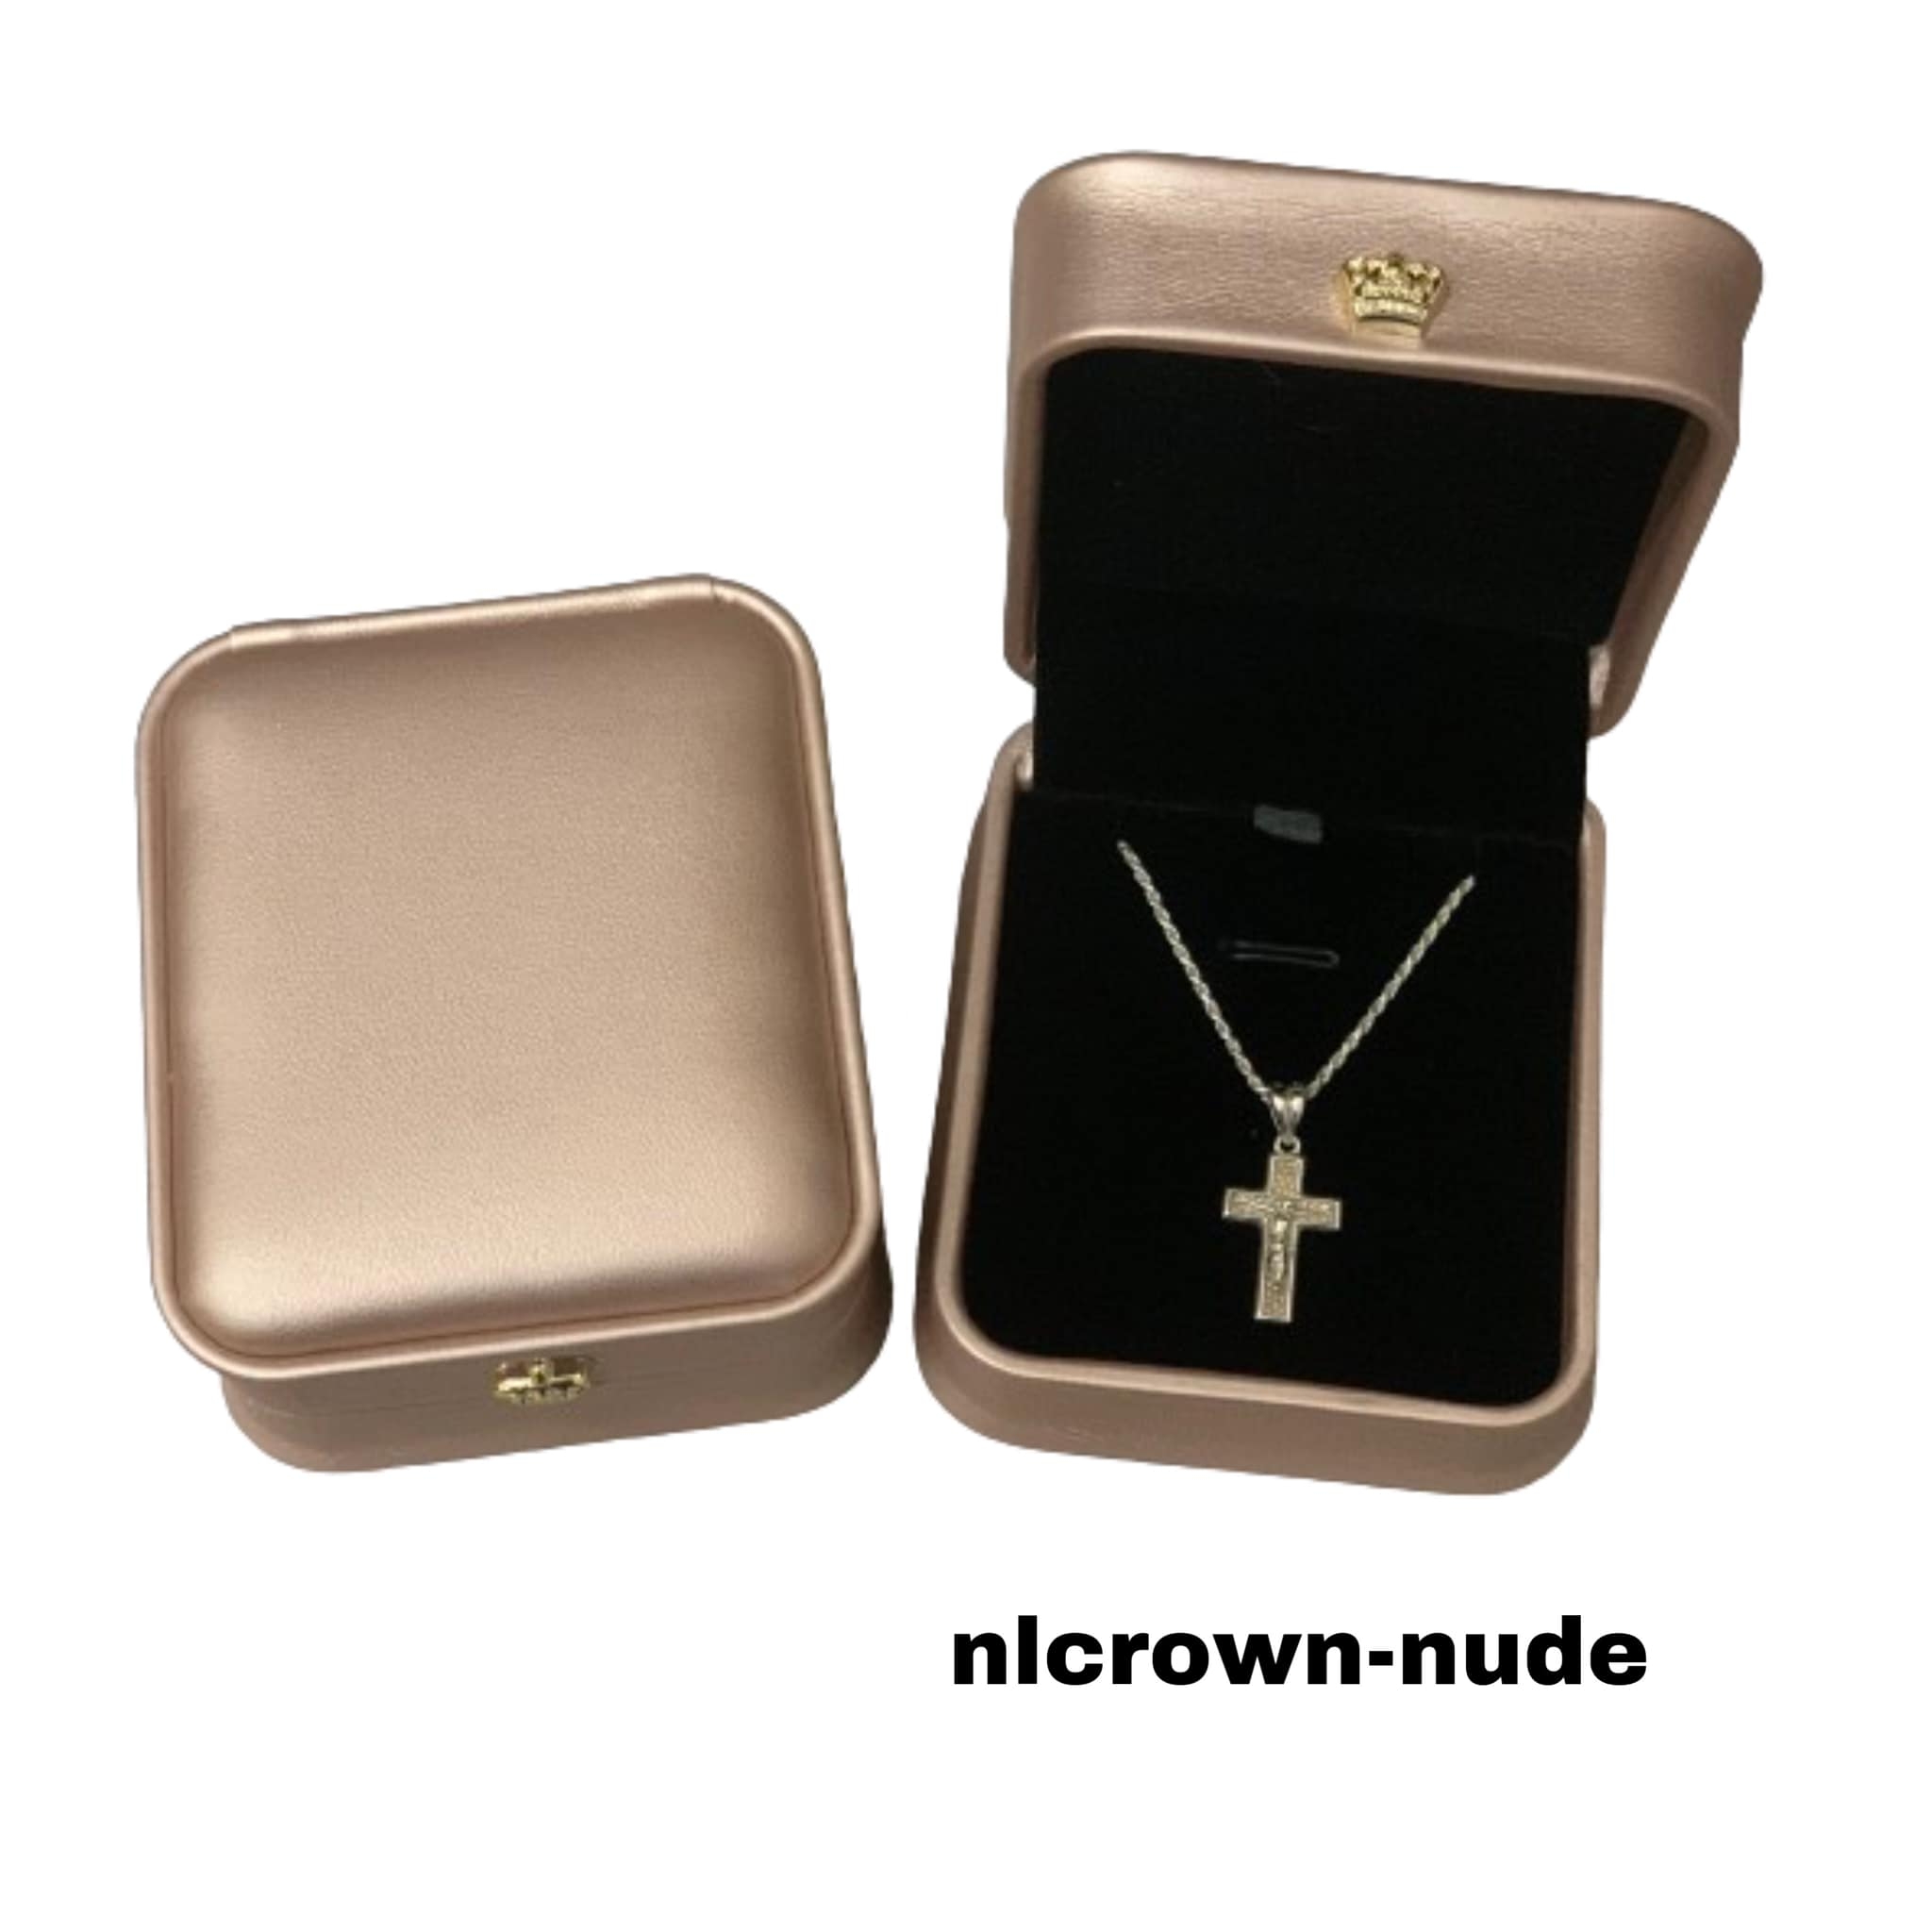 nlcrown-nude